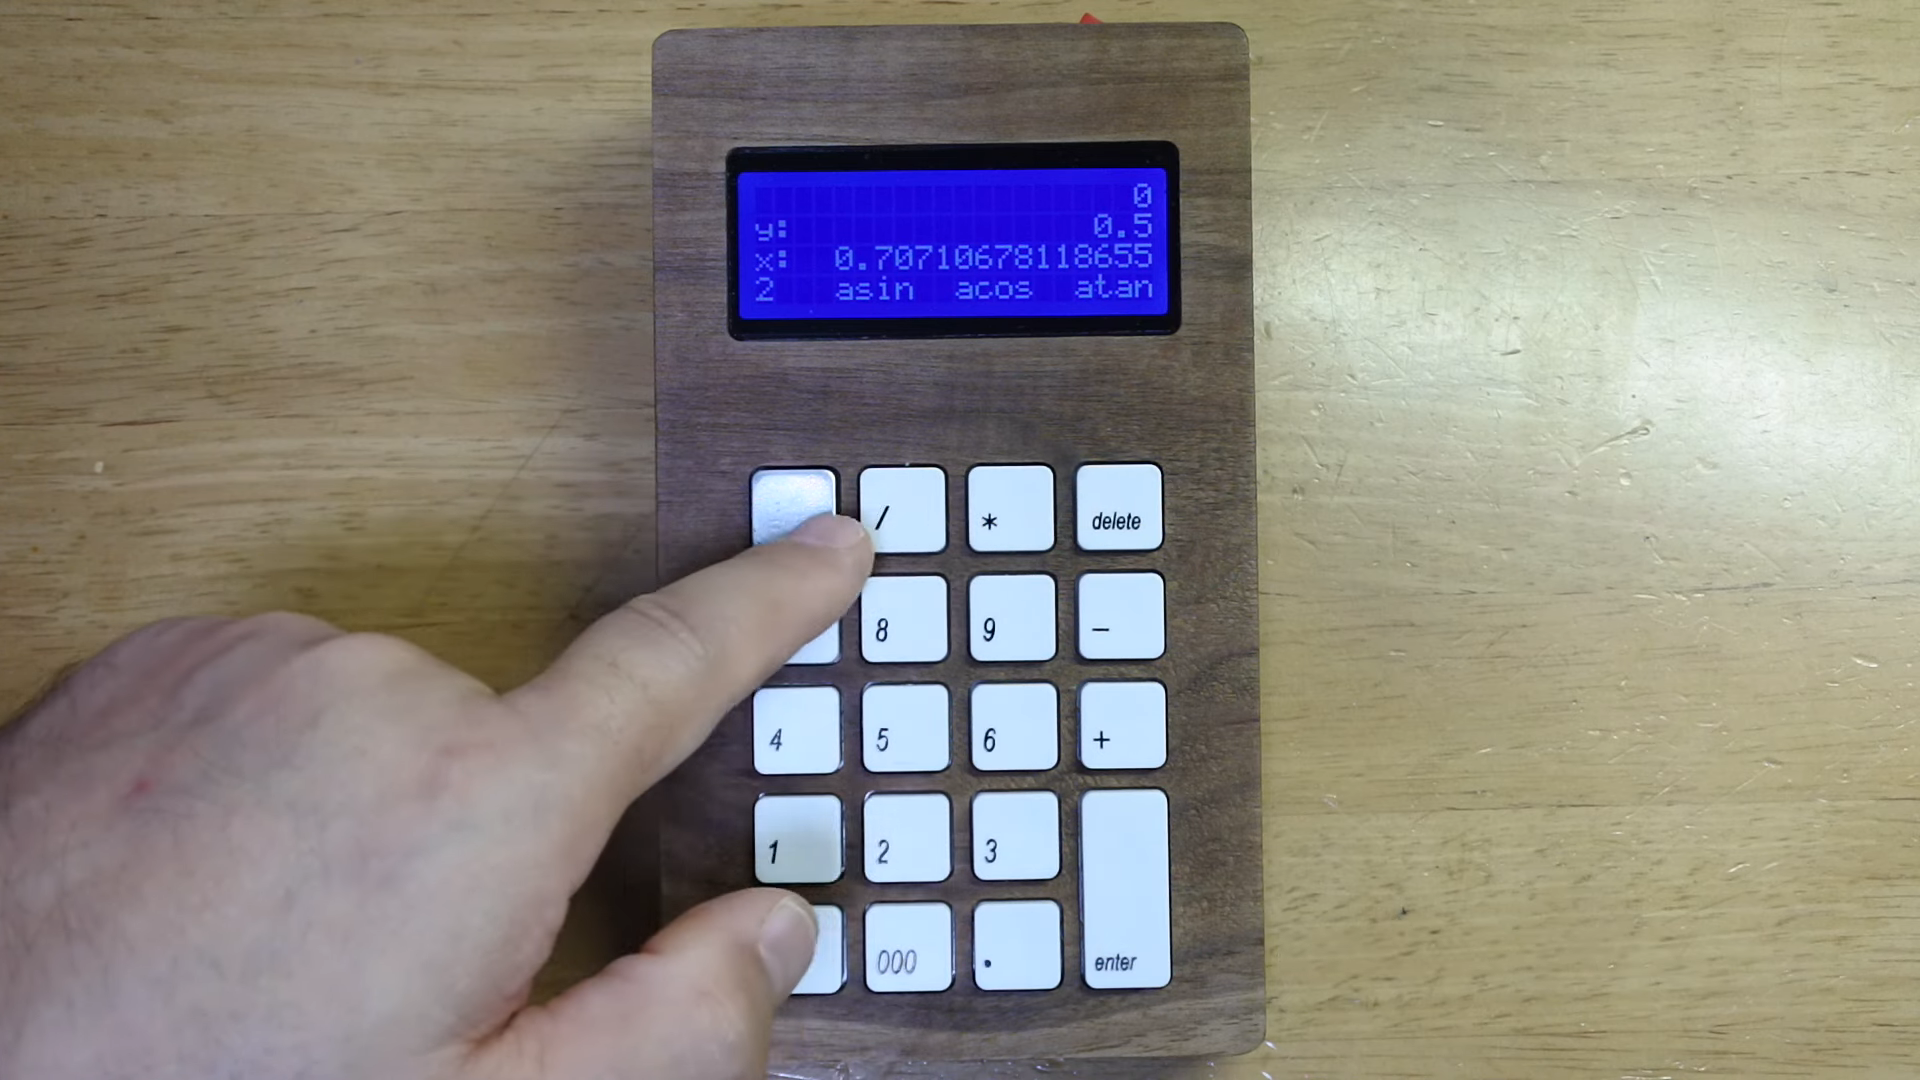 Walnut Case Sets This Custom Arduino-Powered RPN Calculator Apart From The Crowd